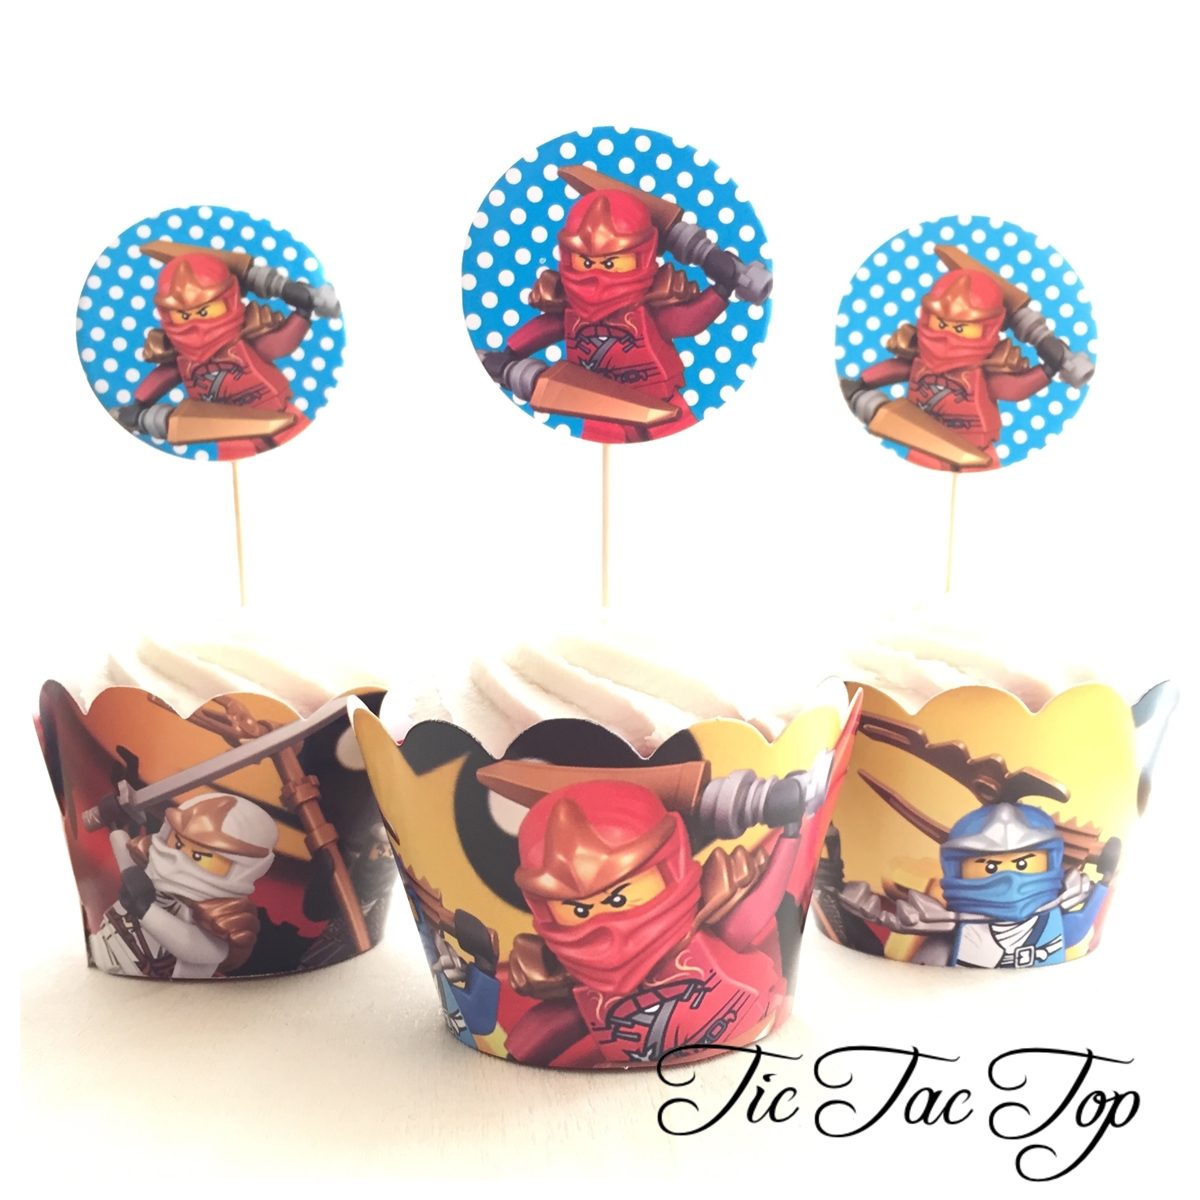 Lego Ninjago Cupcake Wrappers + Toppers